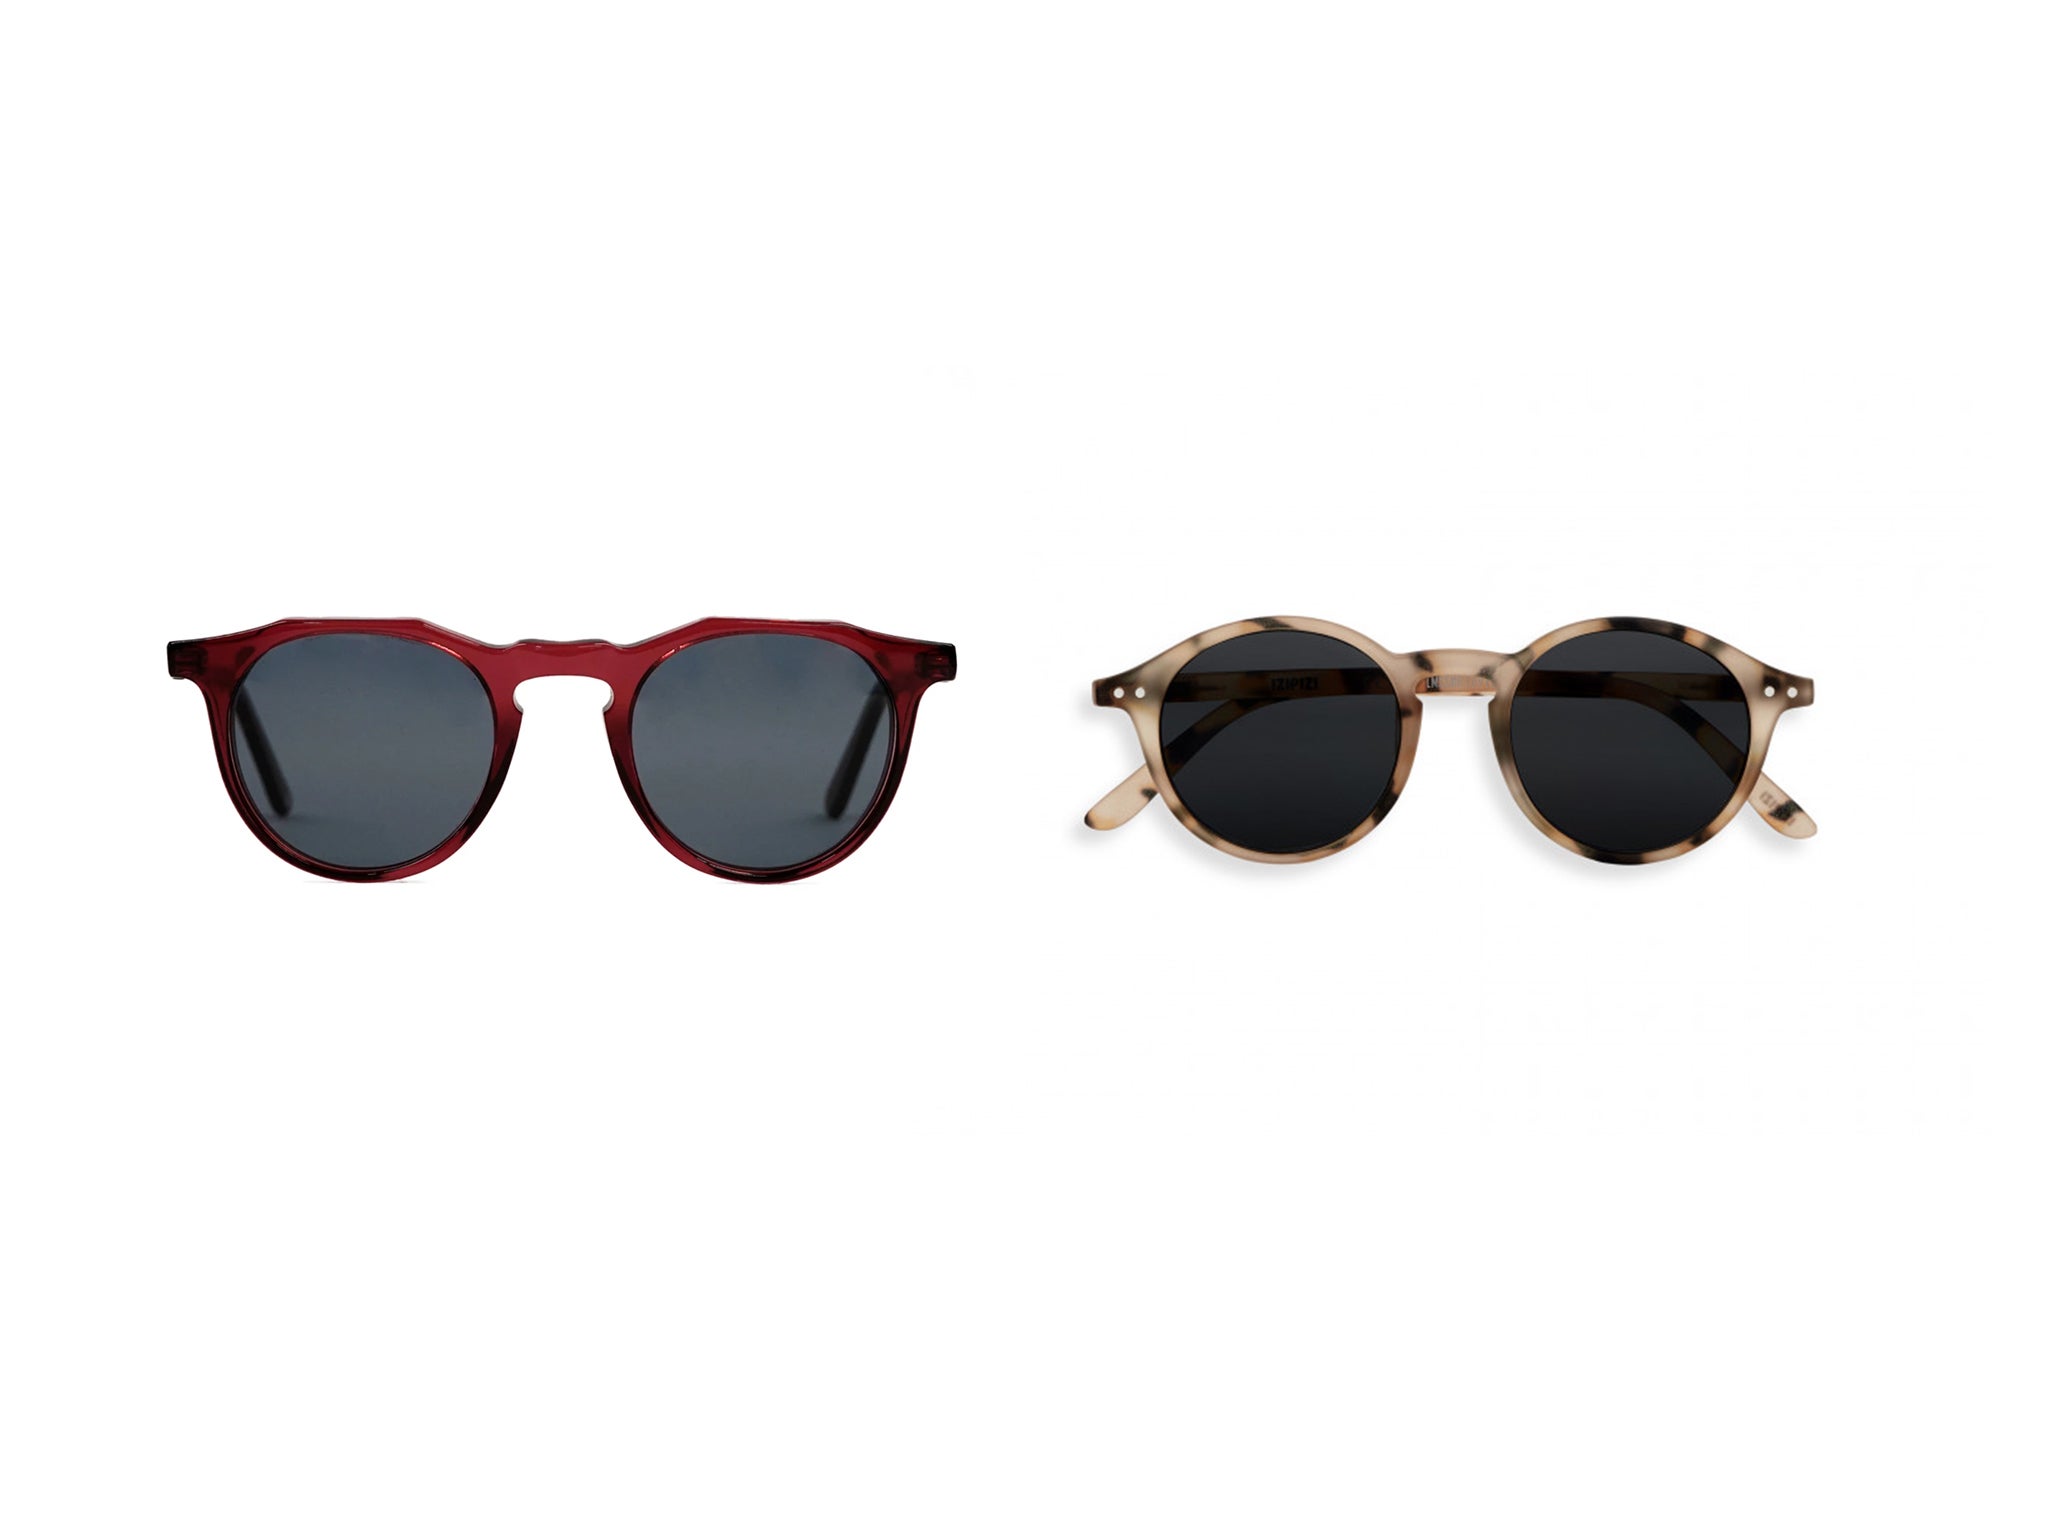 Keep the sun rays off your face while staying stylish with these sunnies for men and women